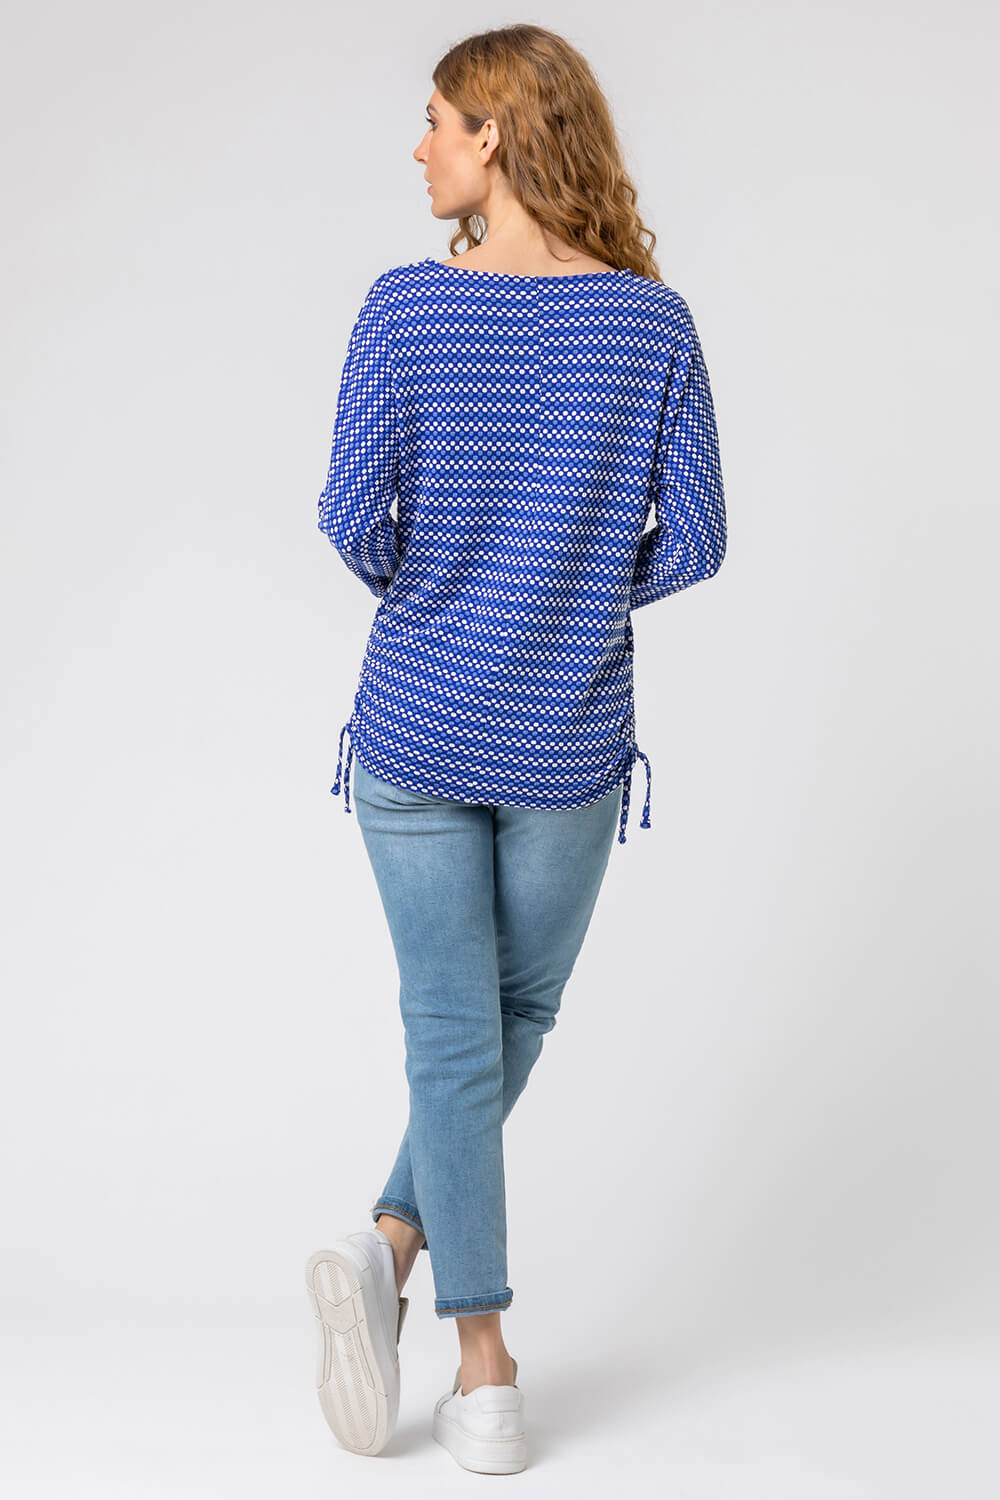 Royal Blue Textured Spot Print Stretch Top, Image 2 of 4